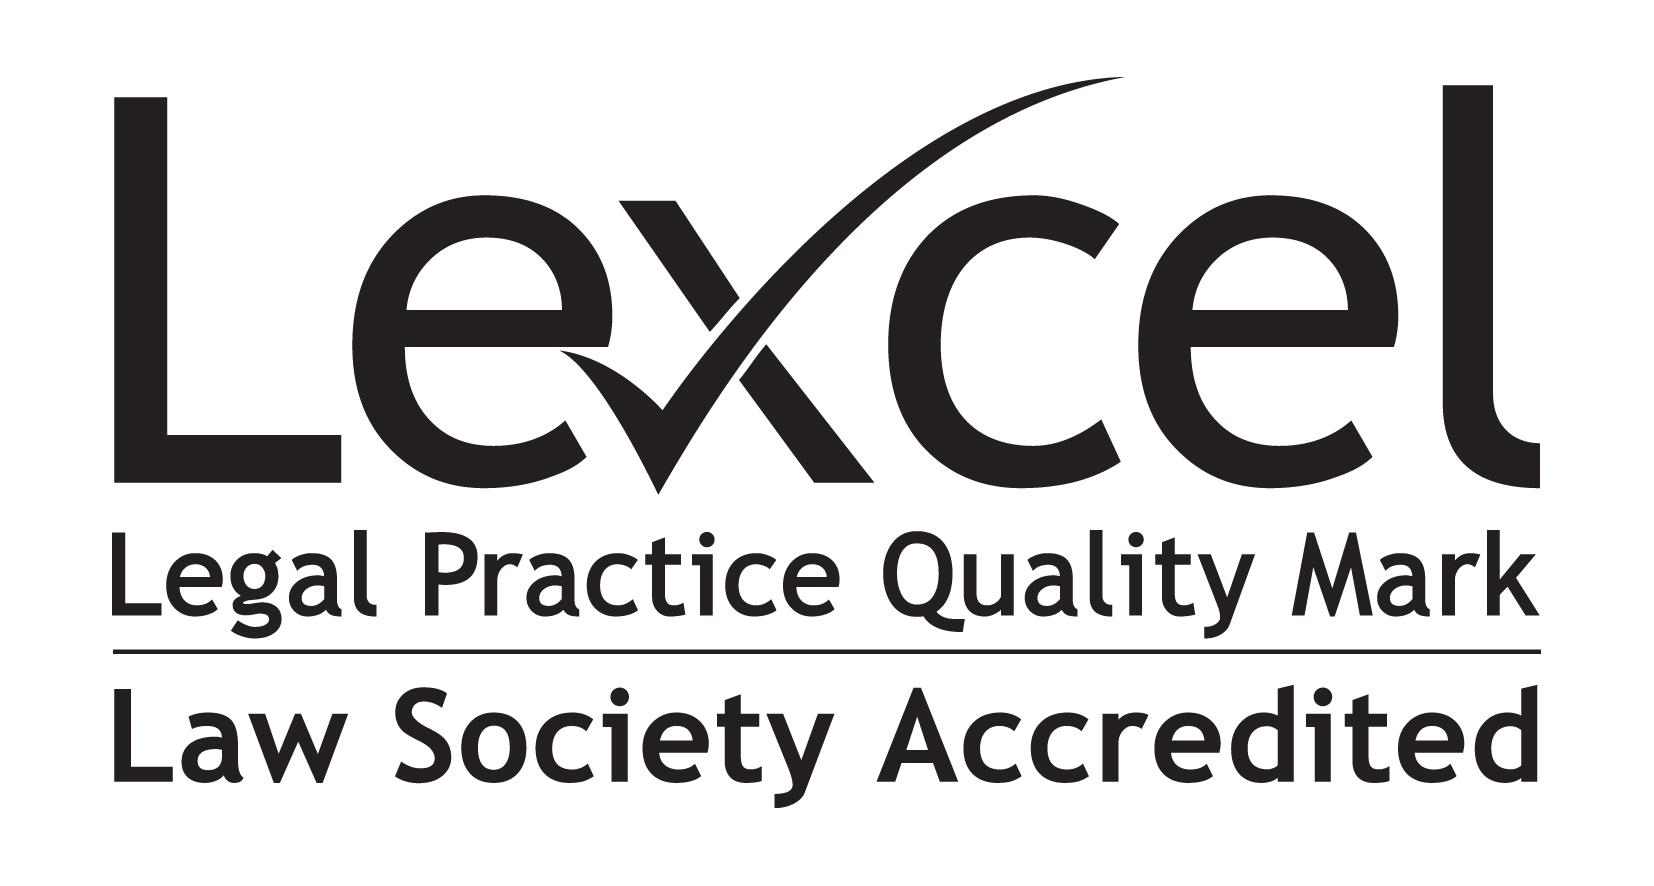 New -Lexcel -Accredited -1col -BLK-logo